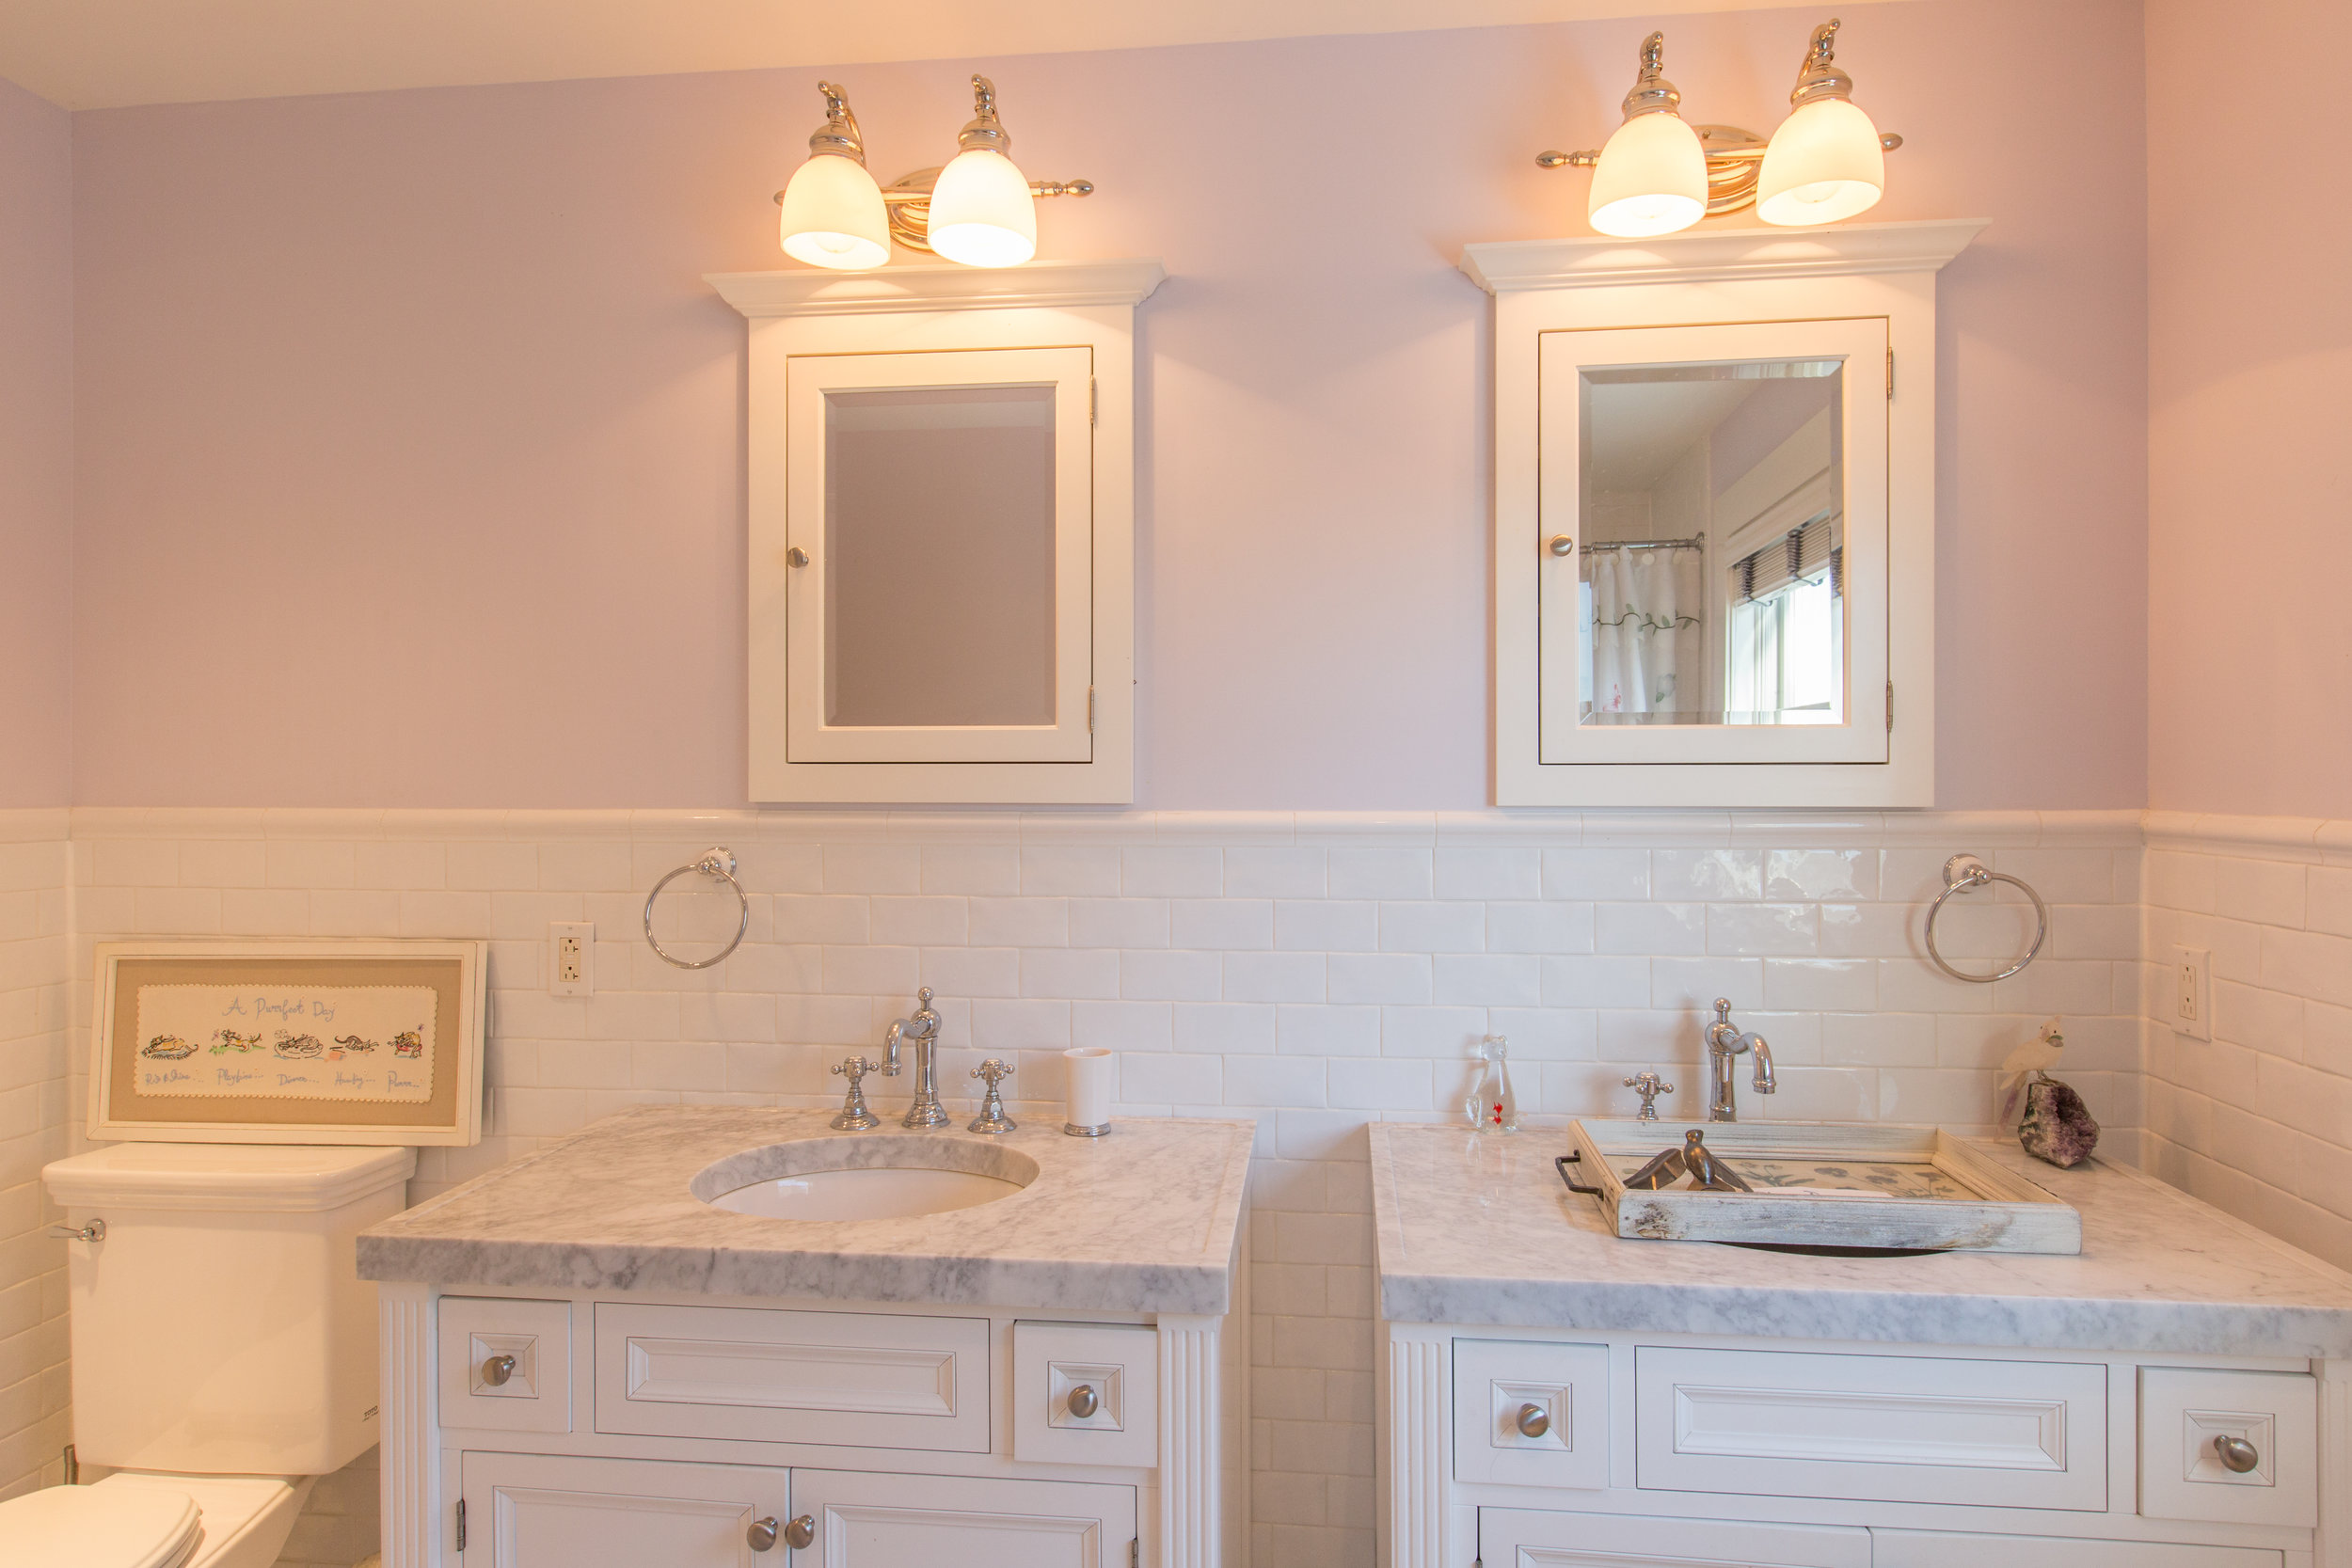  Bathroom with double vanity and double mirrors above. Toilet is to the left of the vanities.  